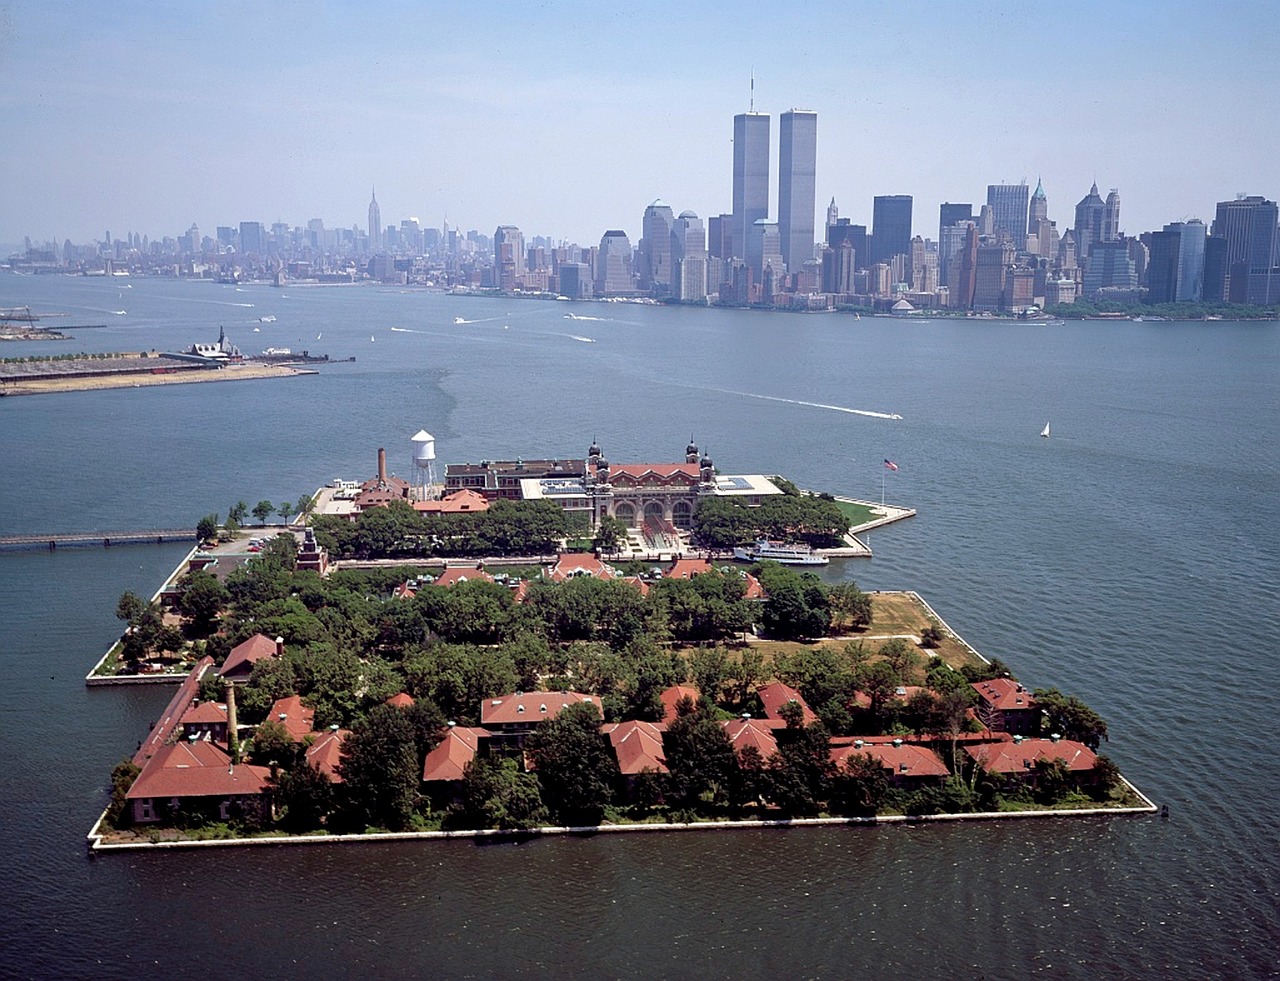 Notable Sites To Visit in New York Every History Buff Must Visit